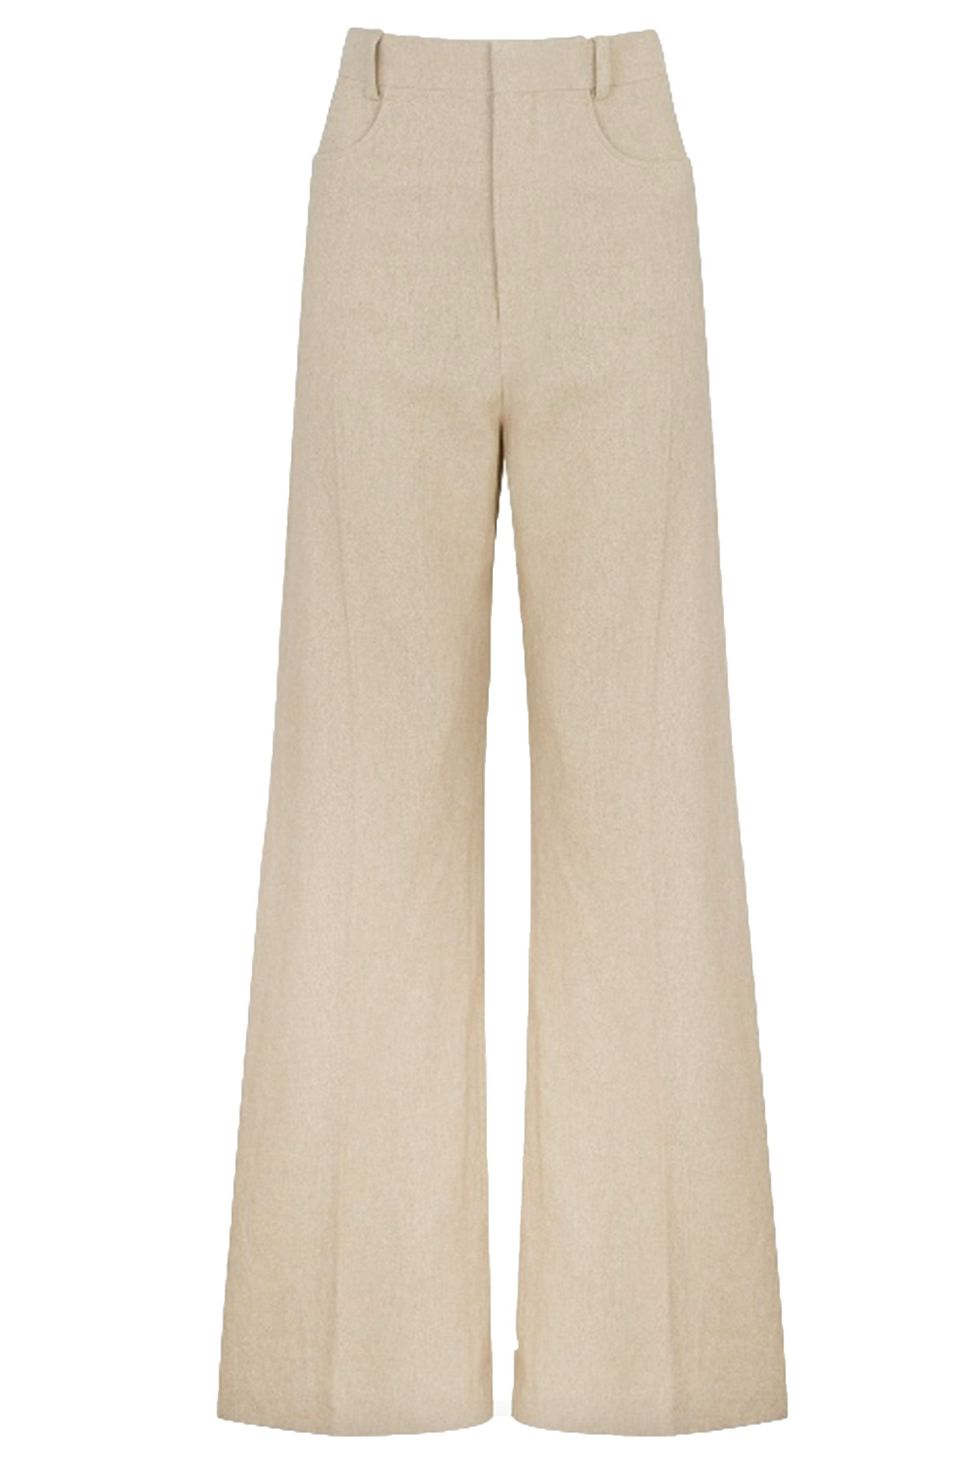 Jacquemus oversized trousers